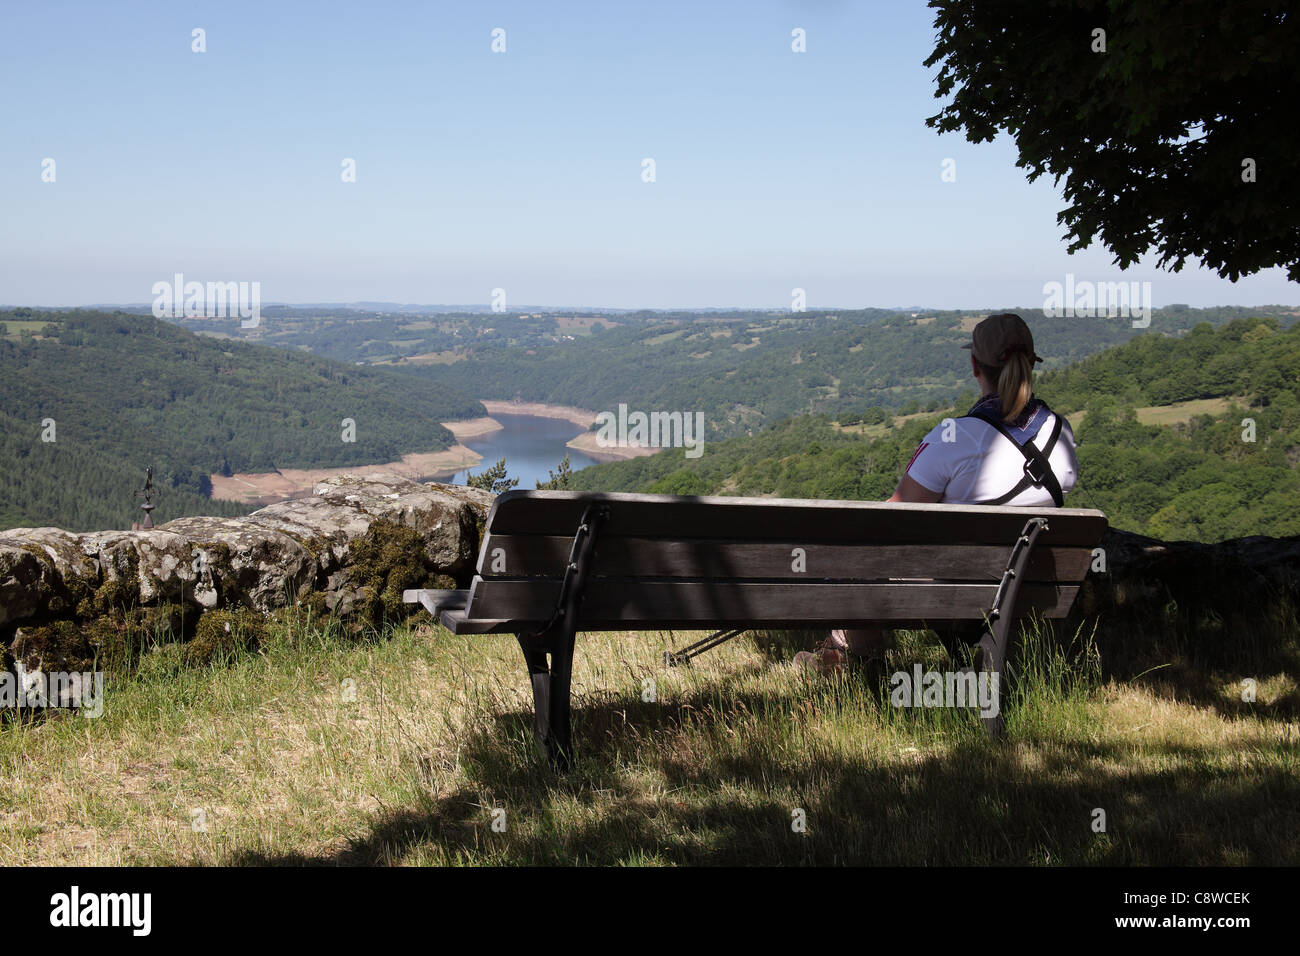 Woman sat on bench looking over a lake, Vines, France, May 2011 Stock Photo